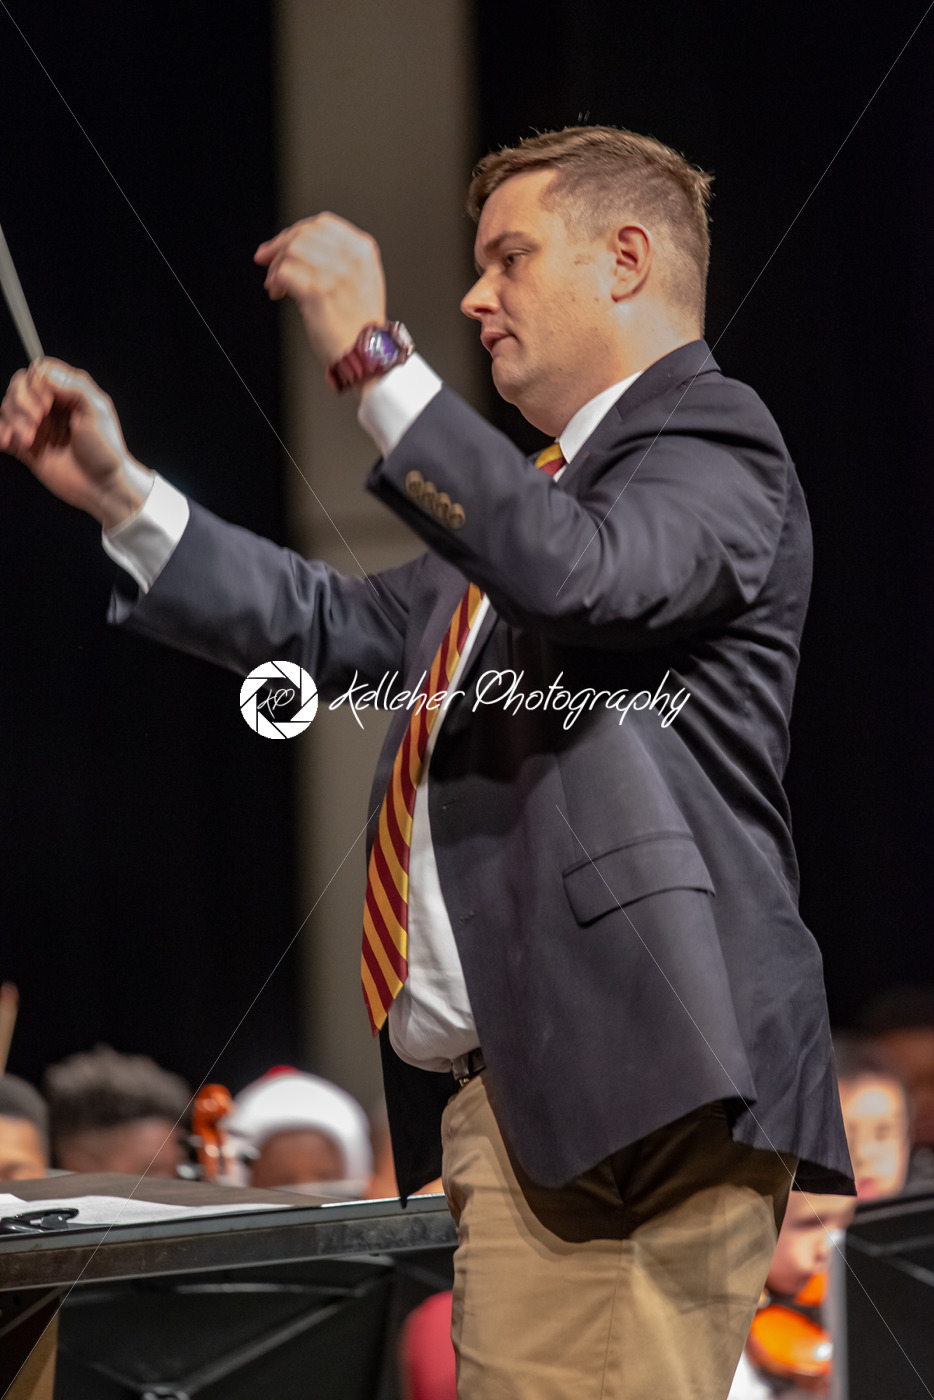 HAVERFORD, PA – DECEMBER 13, 2018: Winter Instrumental Concert at The Haverford School - Kelleher Photography Store